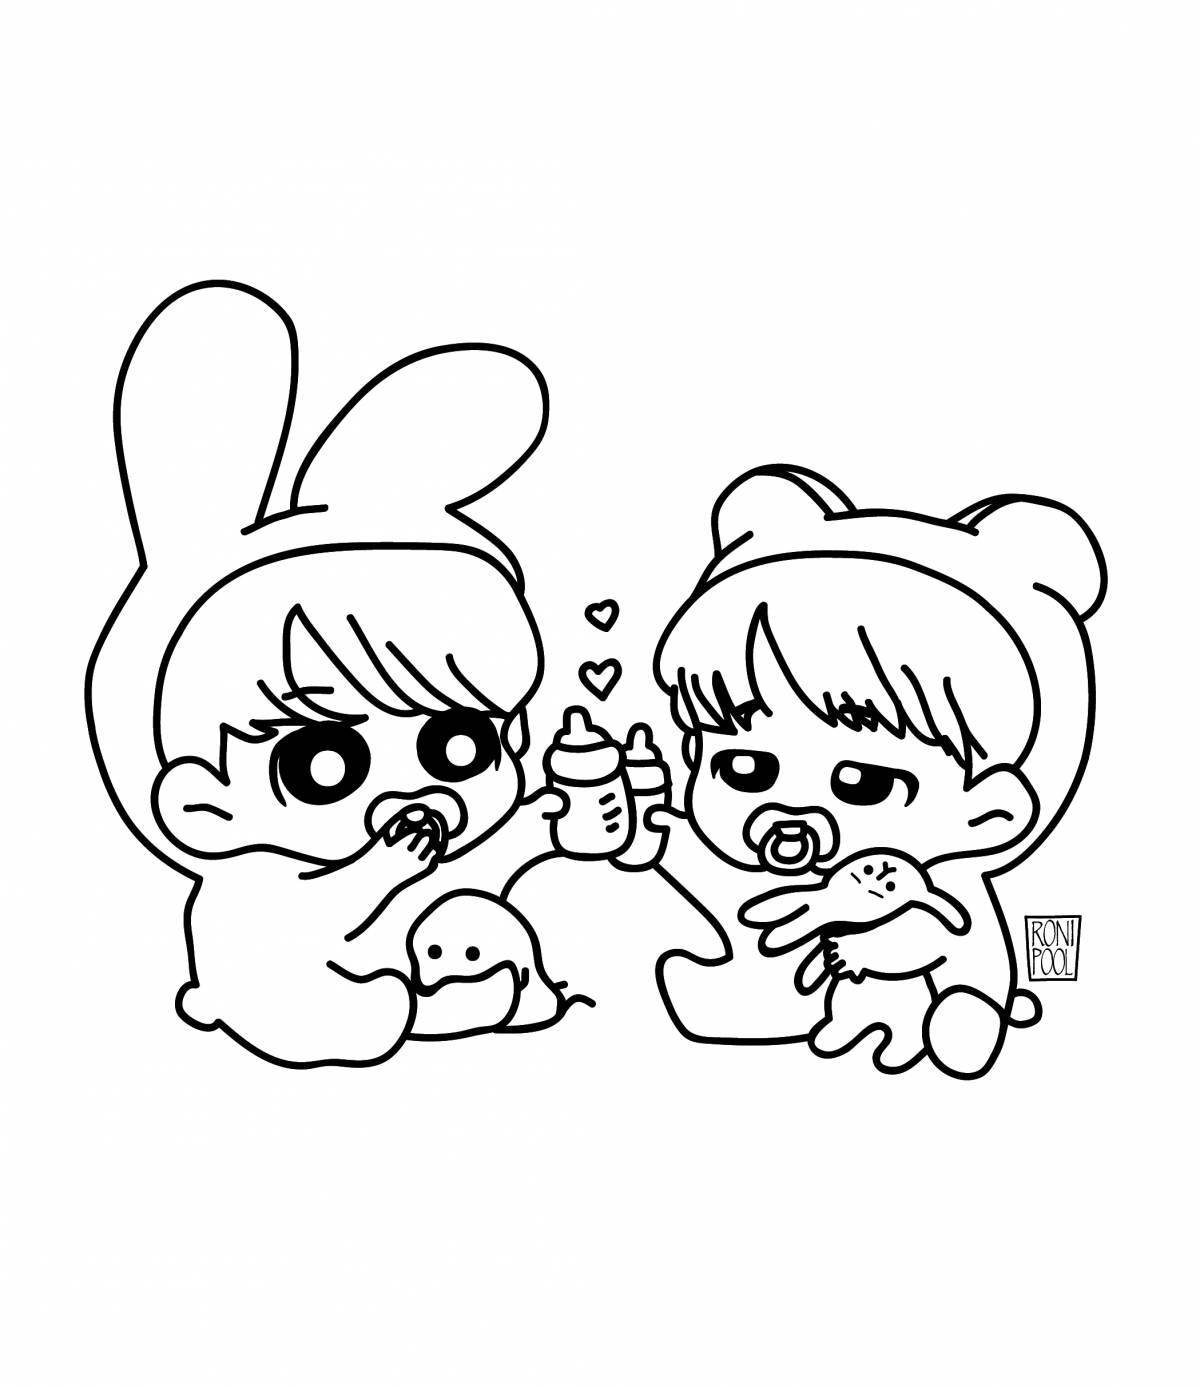 Creative chibi bts coloring page